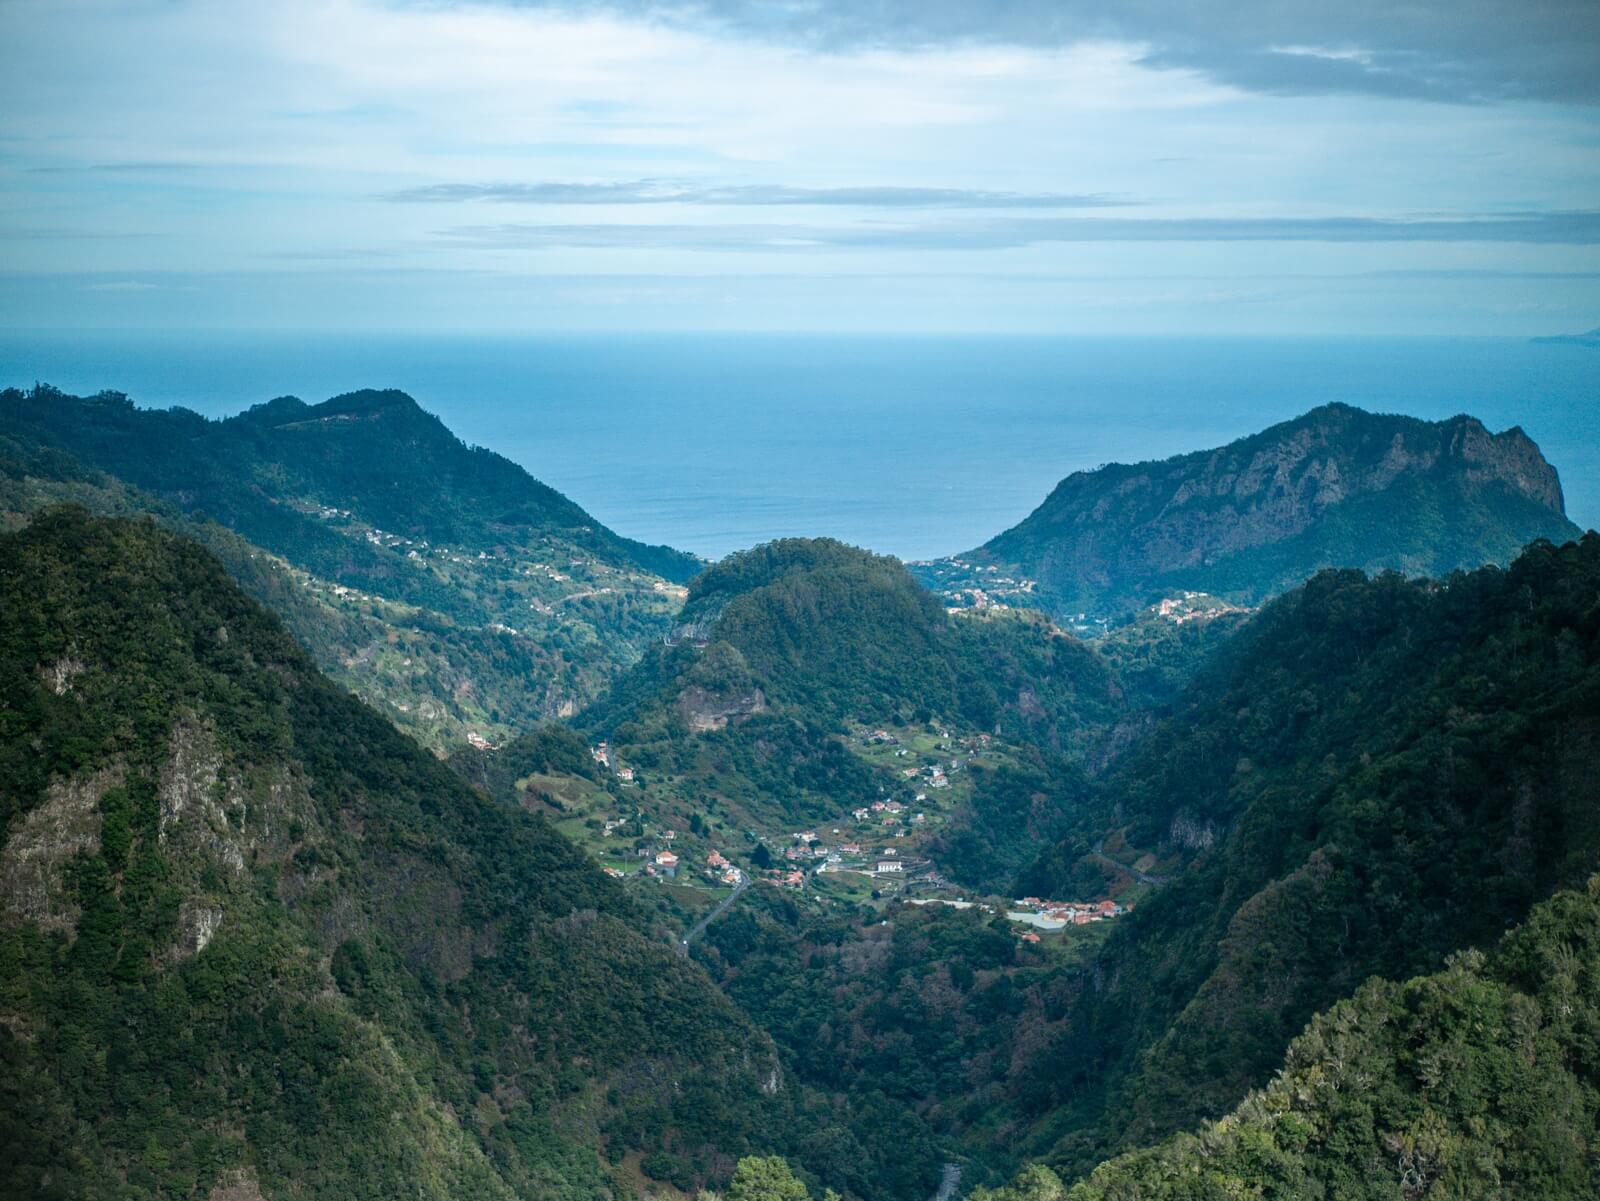 The True Flavours & Natural Beauty of Madeira Islands - Blacoes Viewpoint